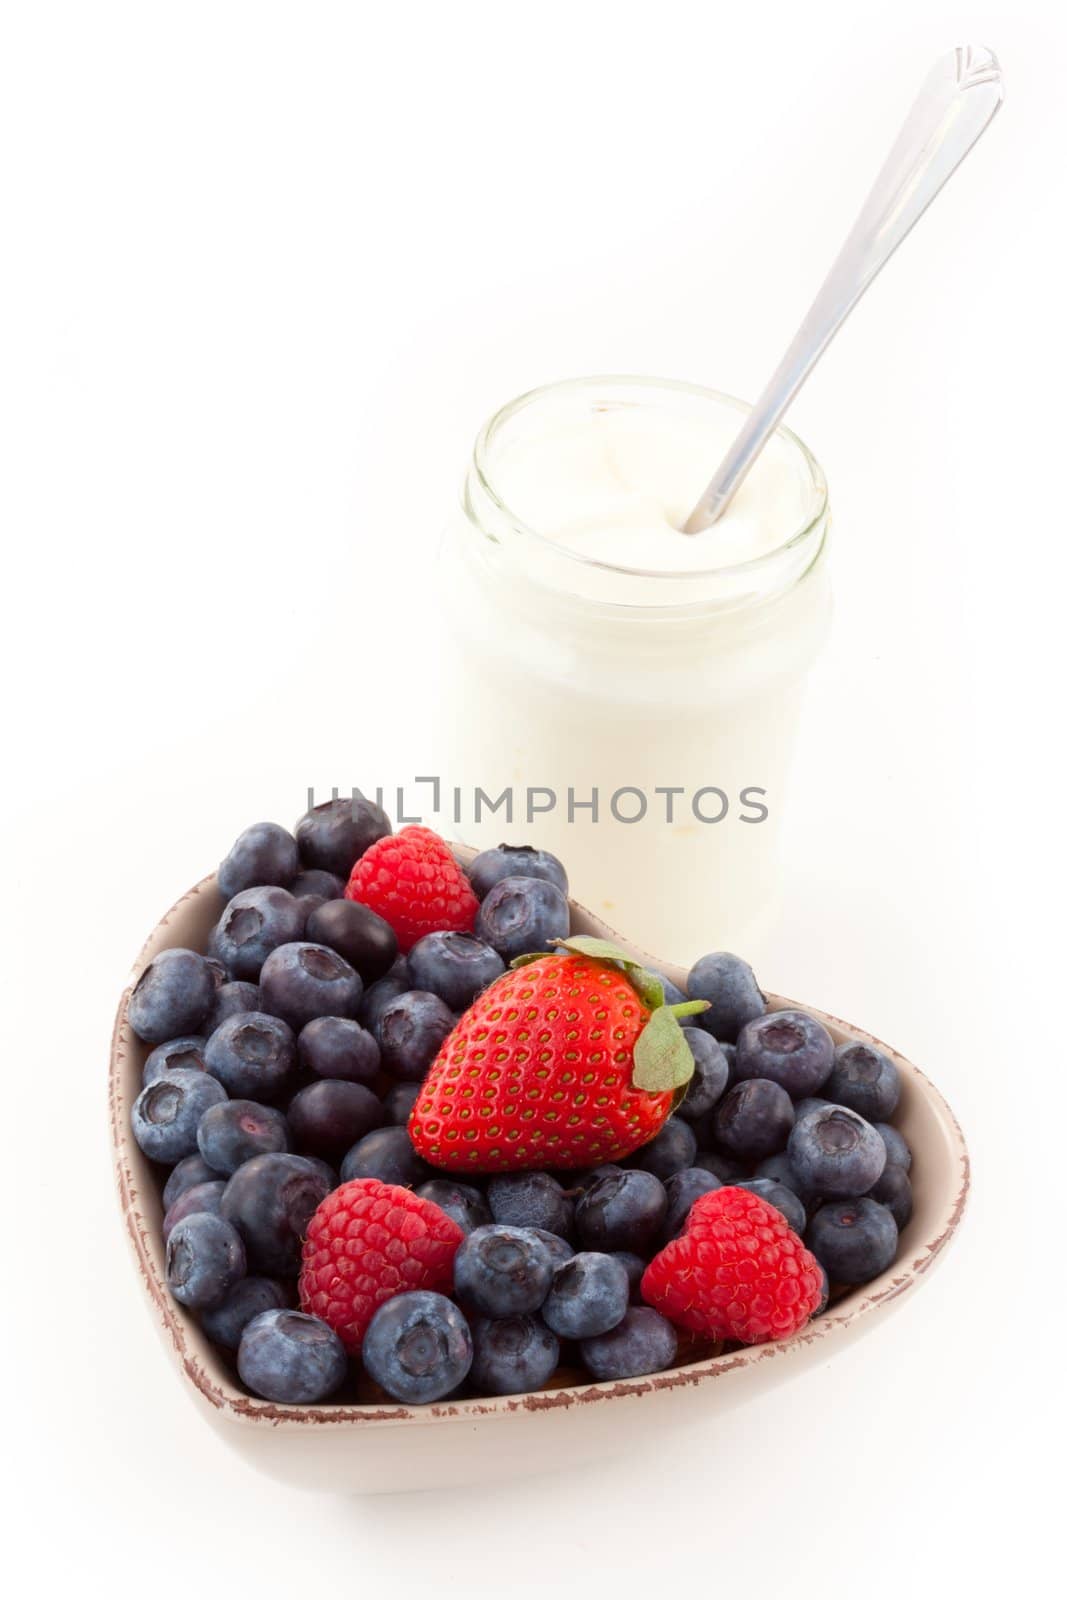 Berries in a heart shaped bowl with yogurt against a white background